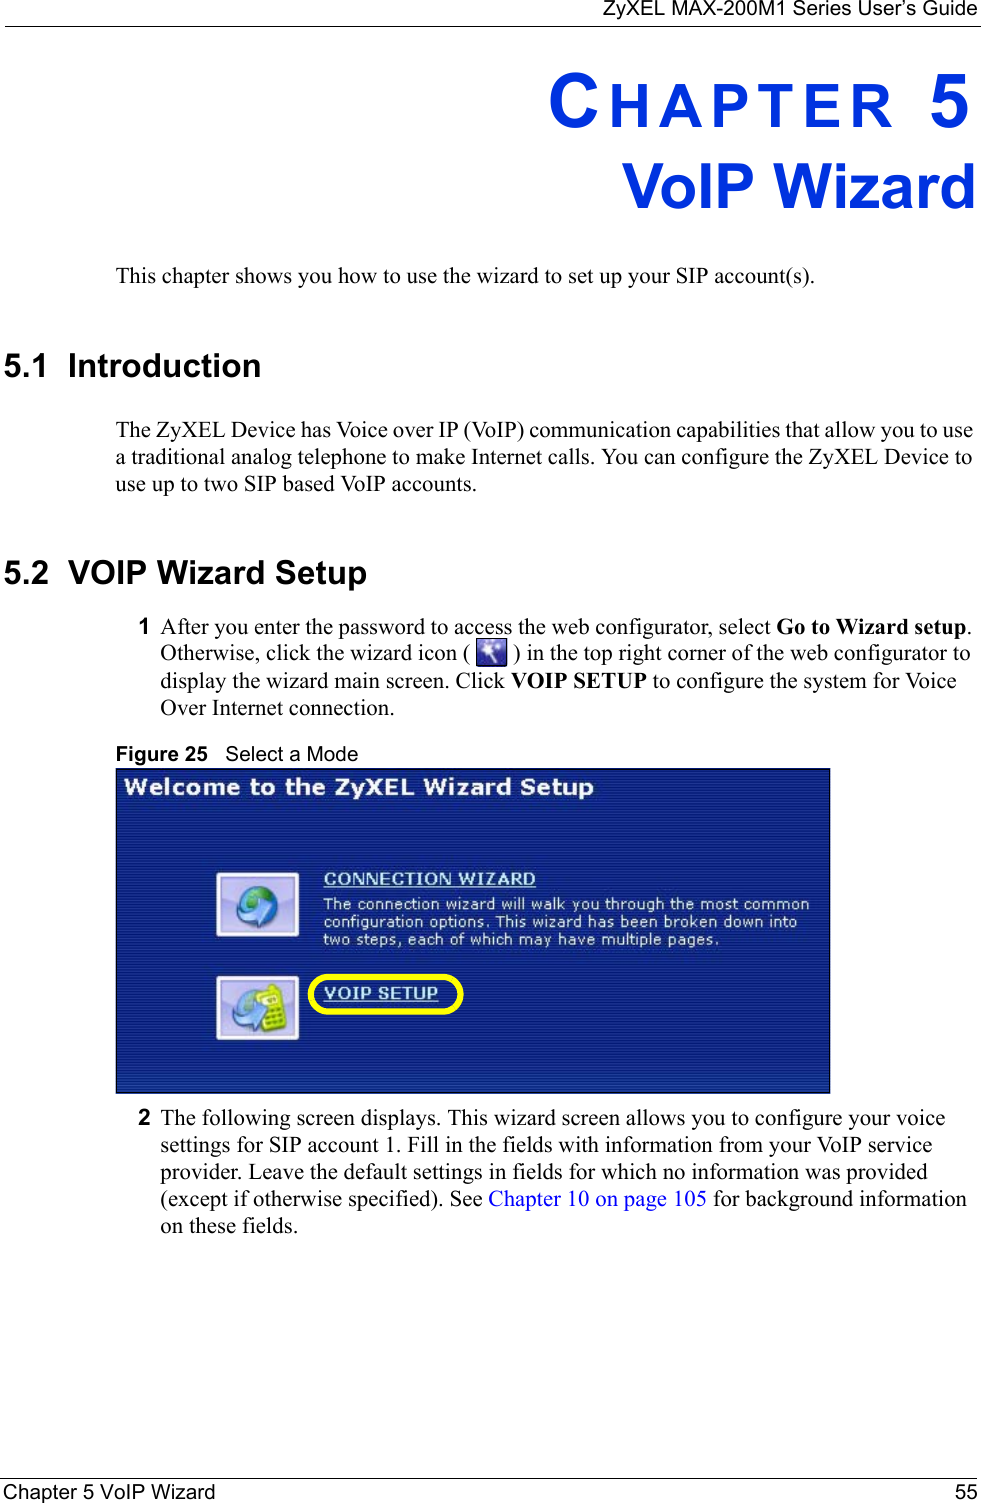 ZyXEL MAX-200M1 Series User’s GuideChapter 5 VoIP Wizard 55CHAPTER 5VoIP WizardThis chapter shows you how to use the wizard to set up your SIP account(s).5.1  IntroductionThe ZyXEL Device has Voice over IP (VoIP) communication capabilities that allow you to use a traditional analog telephone to make Internet calls. You can configure the ZyXEL Device to use up to two SIP based VoIP accounts.5.2  VOIP Wizard Setup1After you enter the password to access the web configurator, select Go to Wizard setup. Otherwise, click the wizard icon (   ) in the top right corner of the web configurator to display the wizard main screen. Click VOIP SETUP to configure the system for Voice Over Internet connection.Figure 25   Select a Mode2The following screen displays. This wizard screen allows you to configure your voice settings for SIP account 1. Fill in the fields with information from your VoIP service provider. Leave the default settings in fields for which no information was provided (except if otherwise specified). See Chapter 10 on page 105 for background information on these fields.